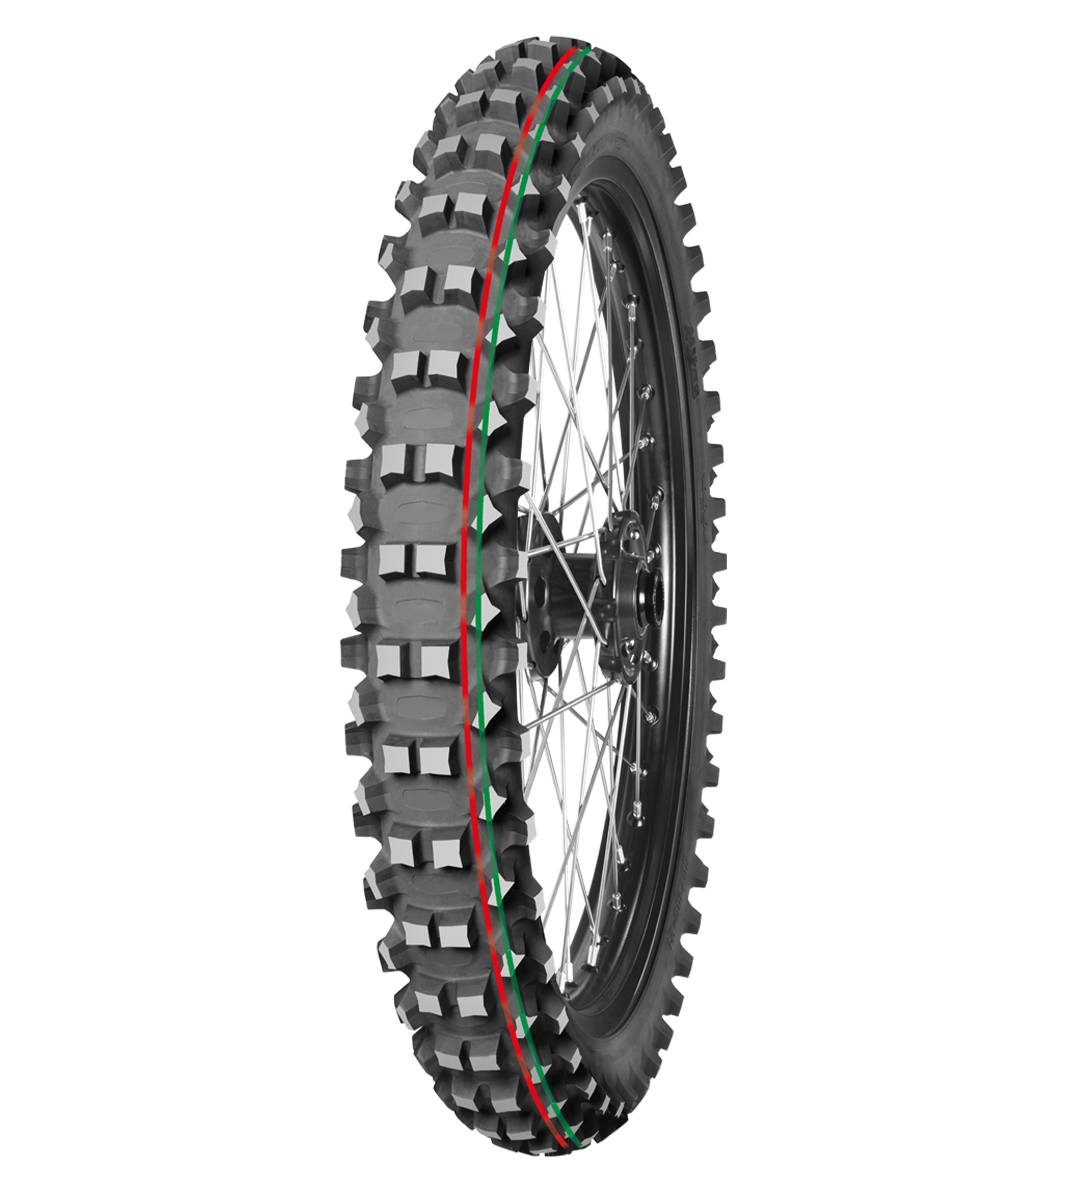 Mitas TERRA FORCE-MX MH 70/100-19 Motocross Competition Off-Road MEDIUM TO HARD 42M Red &amp; Green Tube Front Tire, 226173, 70/100-19, Front, Motocross, Motocross Competition, Off-Road, Terra Force, Terra Force-MX MH, Trail, Tires - Imported and distributed in North &amp; South America by Lindeco Genuine Powersports - Premier Powersports Equipment and Accessories for Motorcycle Enthusiasts, Professional Riders and Dealers.